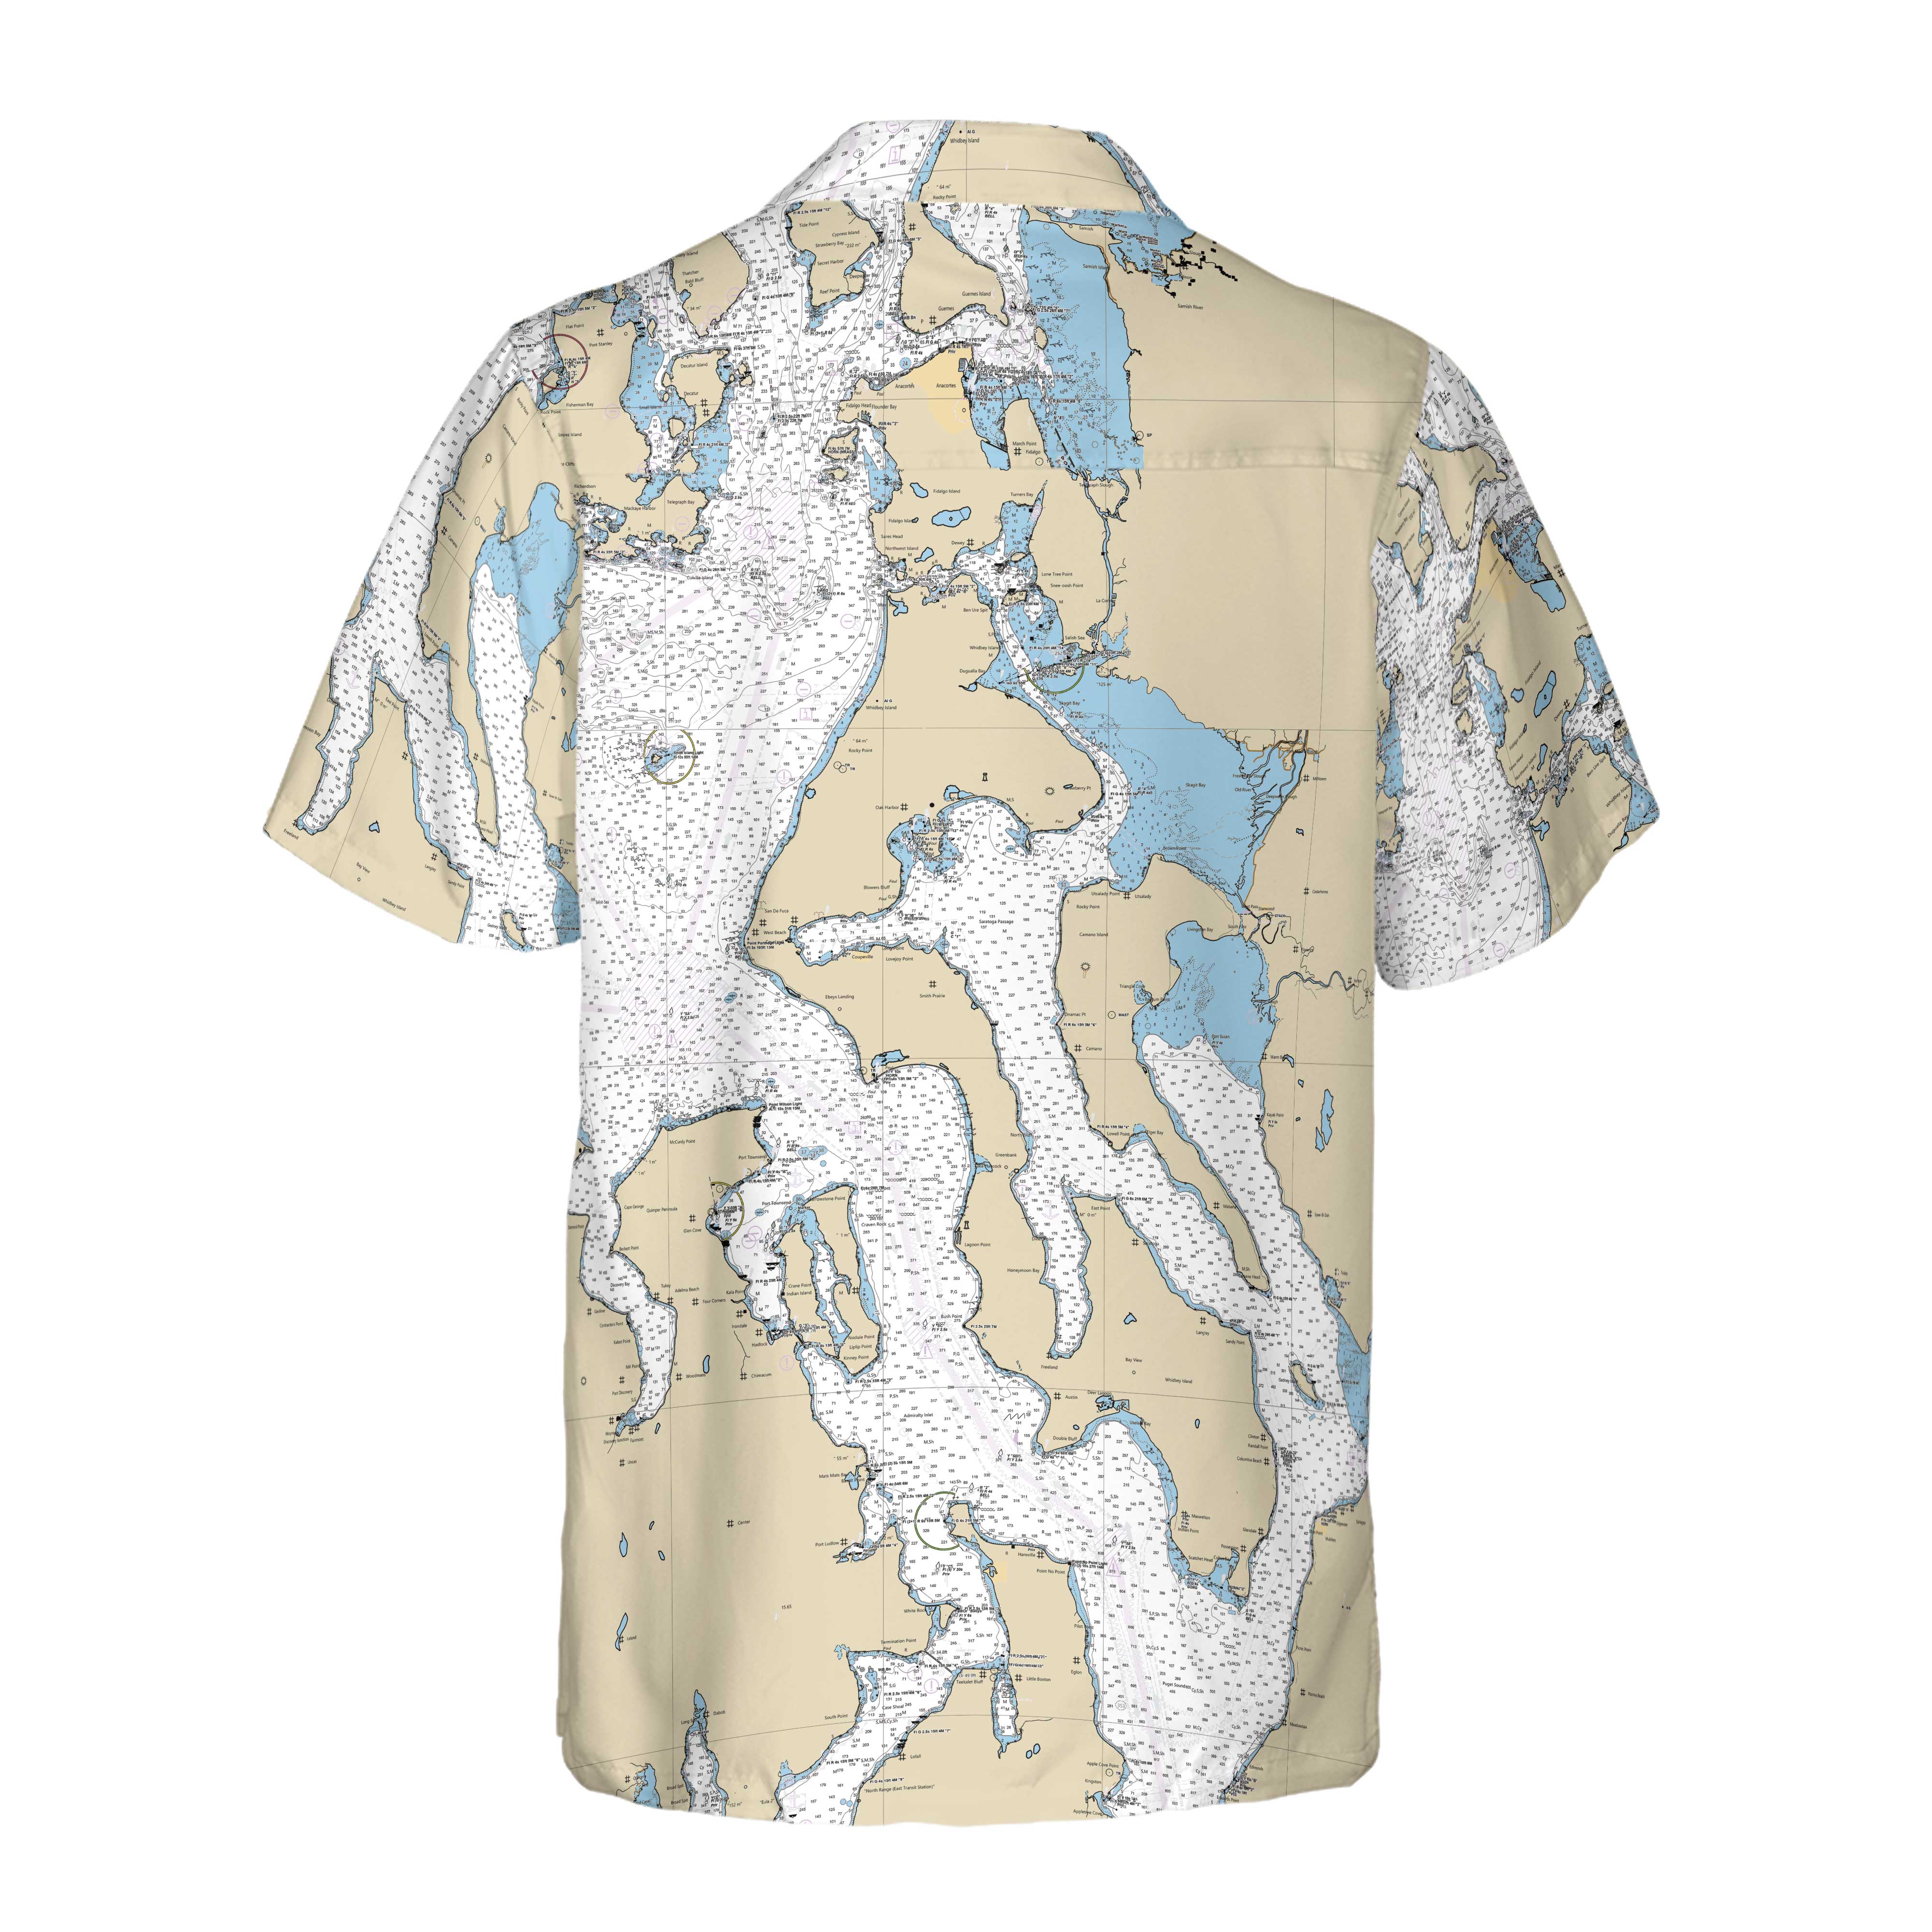 The Whidbey Island Coconut Button Camp Shirt